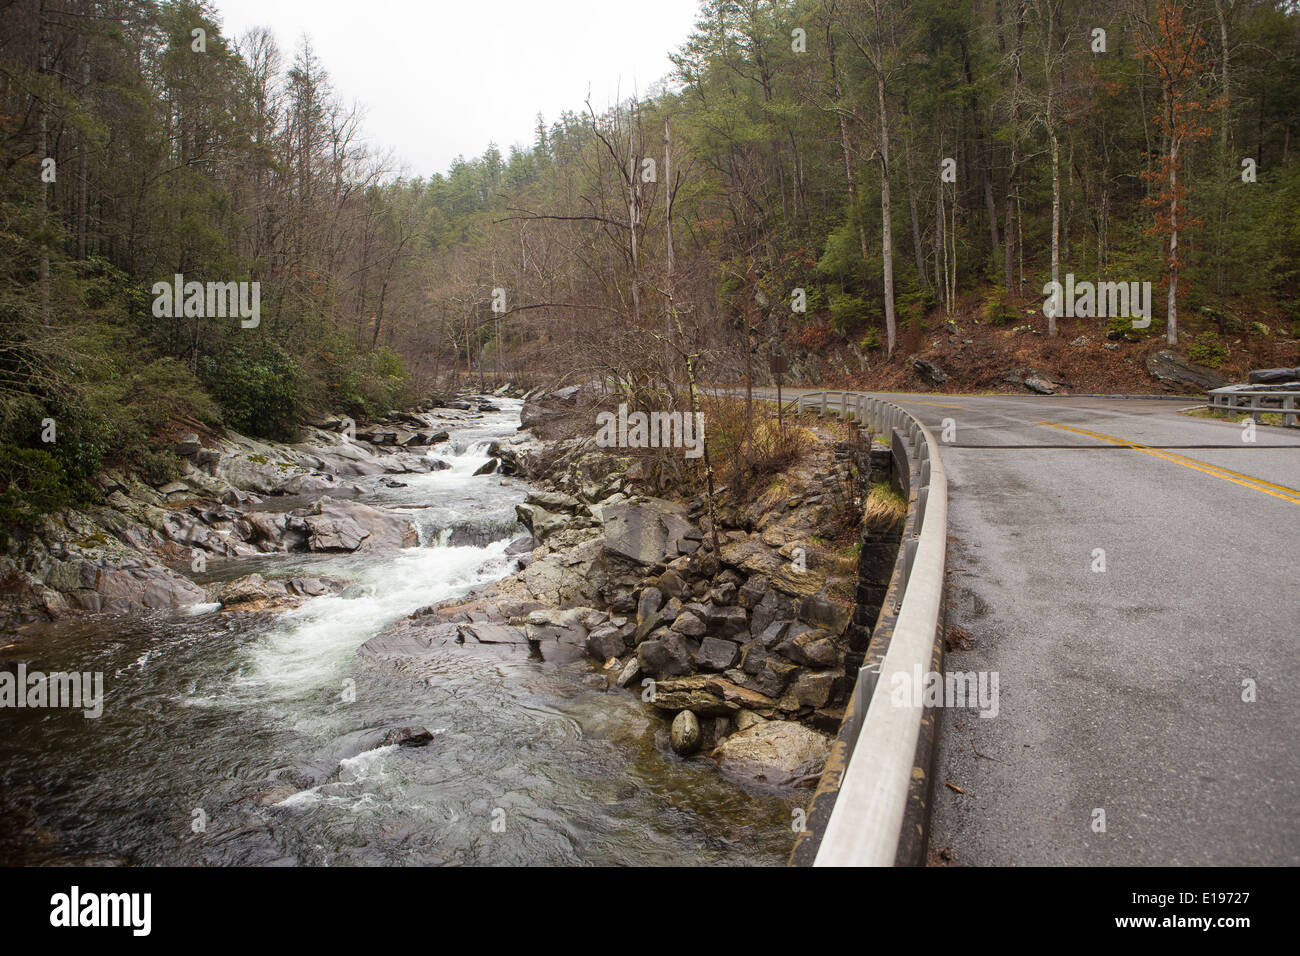 Old State Highway 73 ist im Nationalpark Great Smoky Mountains in Tennessee abgebildet. Stockfoto